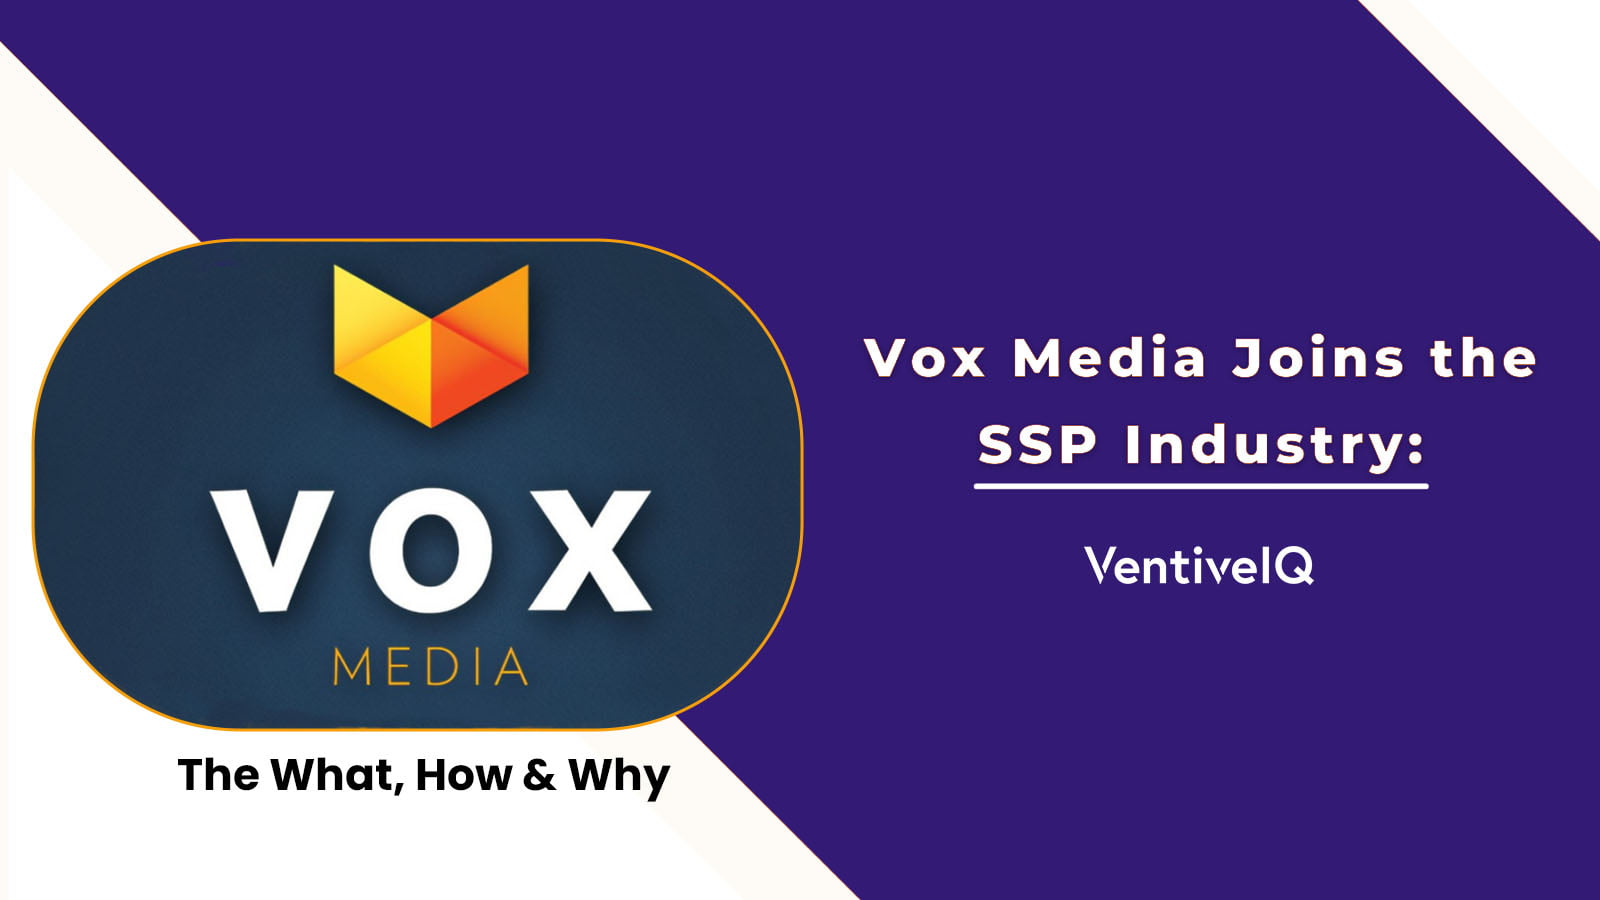 Vox Media Joins the SSP Industry: The What, How, and Why